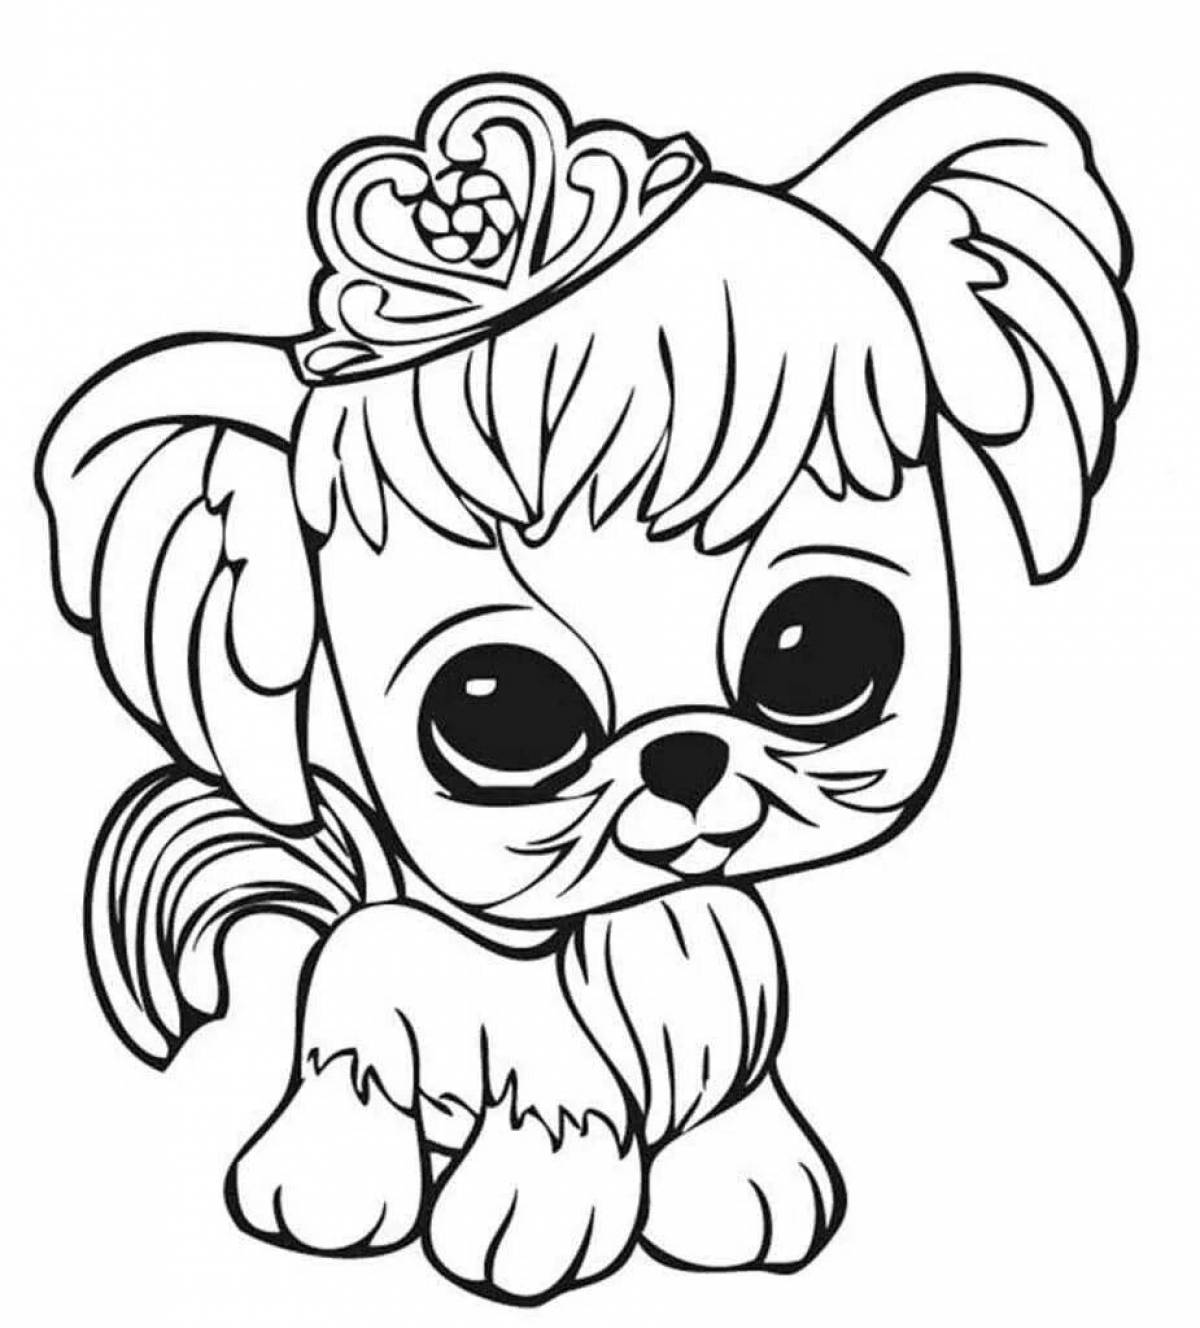 Naughty coloring page for girls puppies